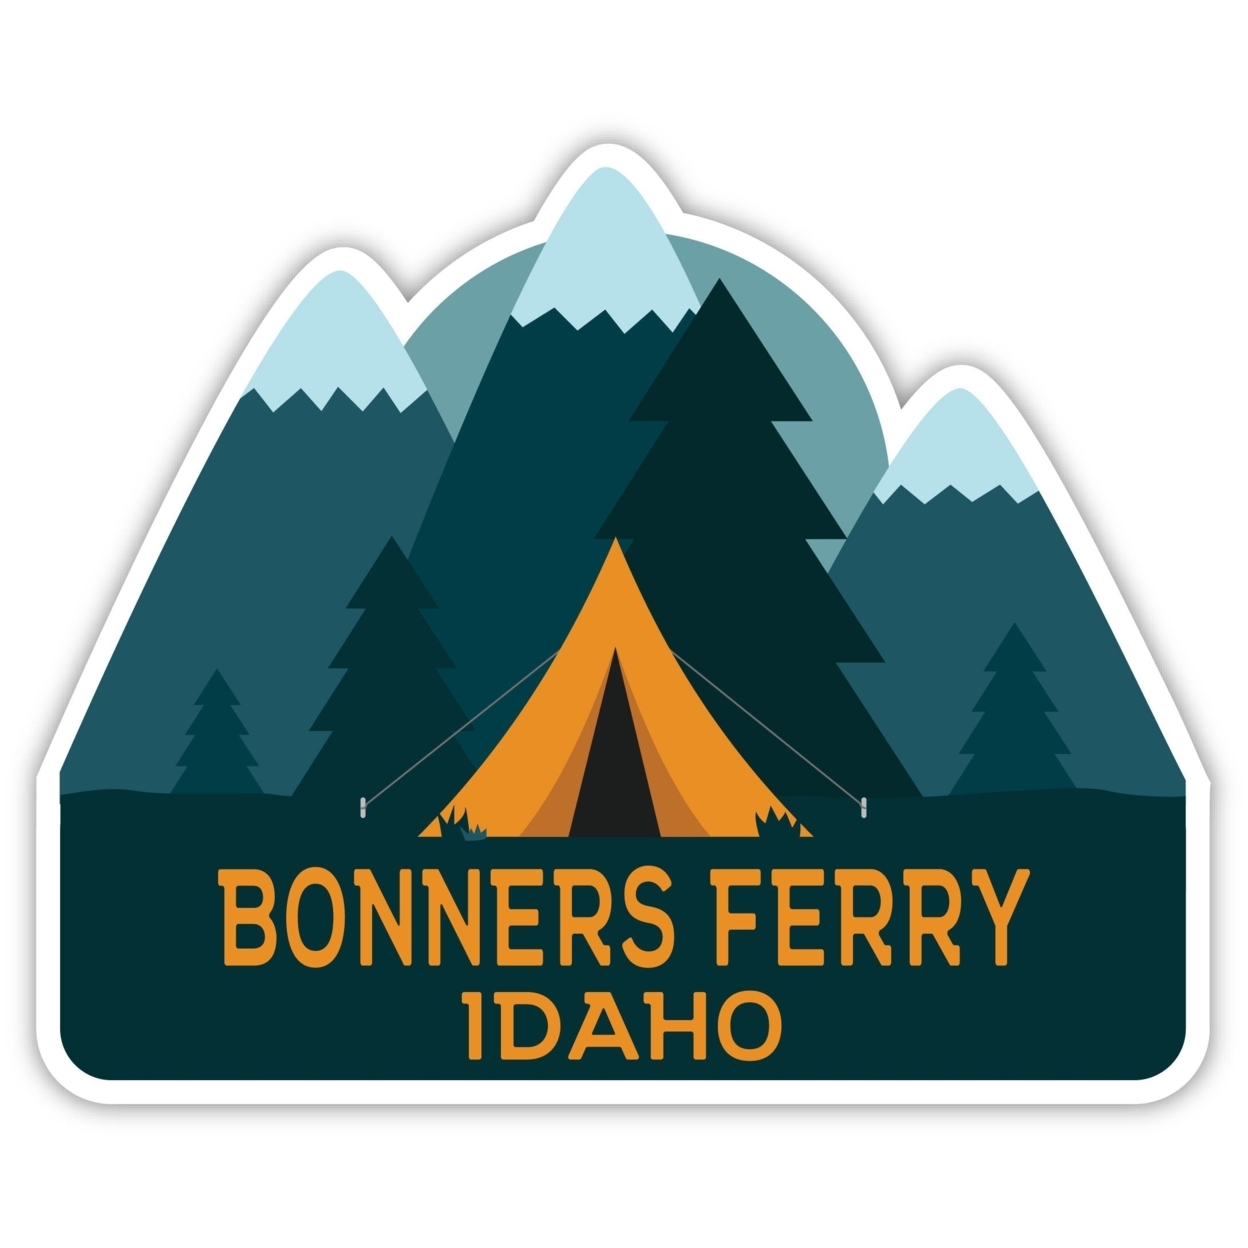 Bonners Ferry Idaho Souvenir Decorative Stickers (Choose Theme And Size) - 4-Pack, 6-Inch, Camp Life